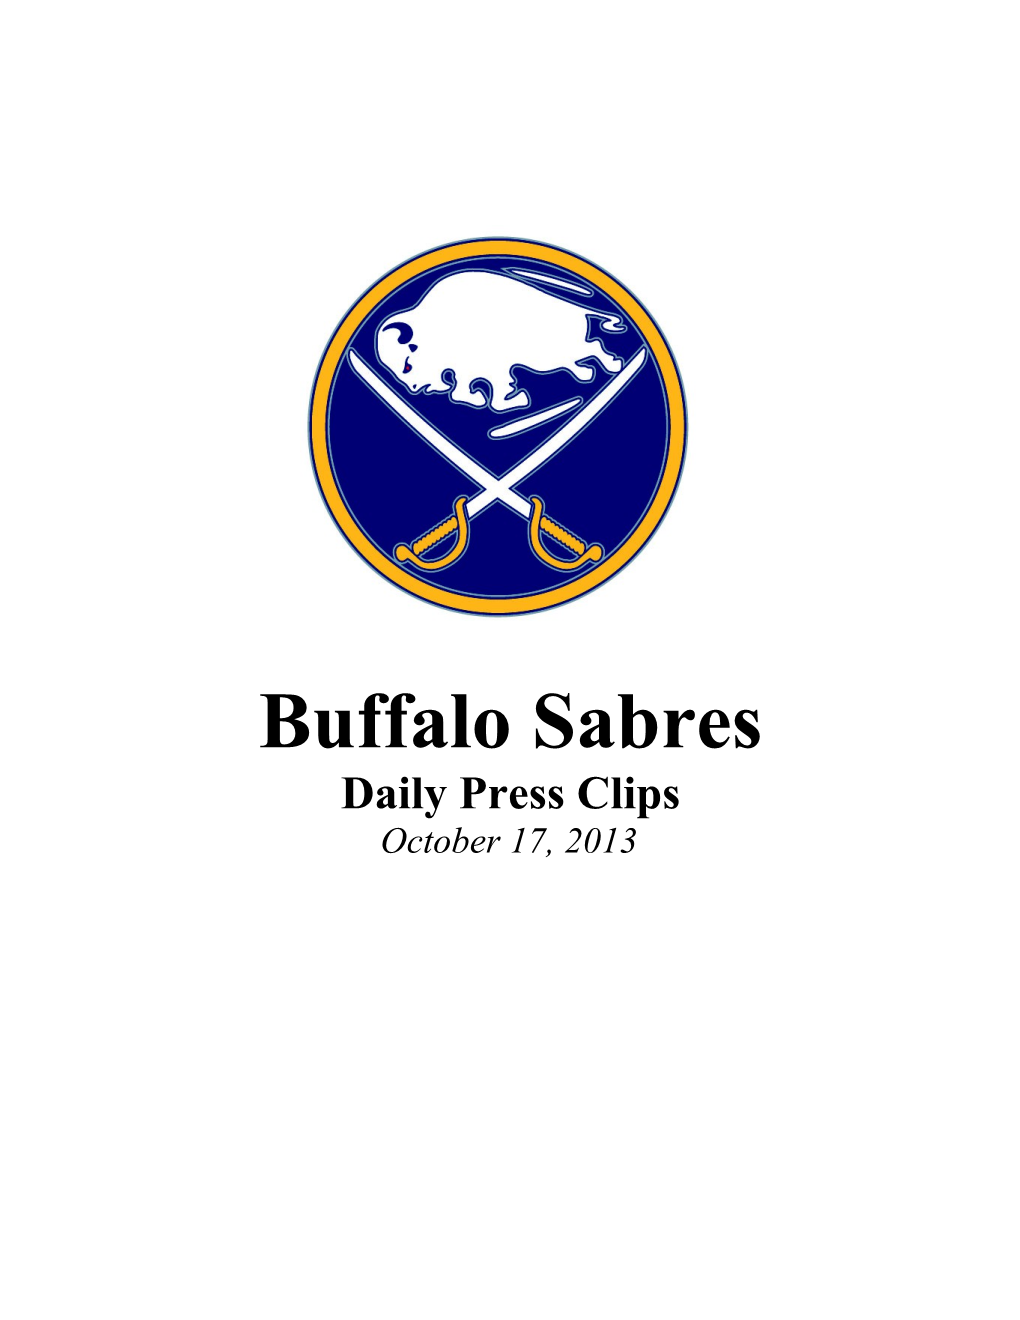 Press Clips October 17, 2013 Canucks-Sabres Preview by Kevin Chroust Associated Press October 17, 2013